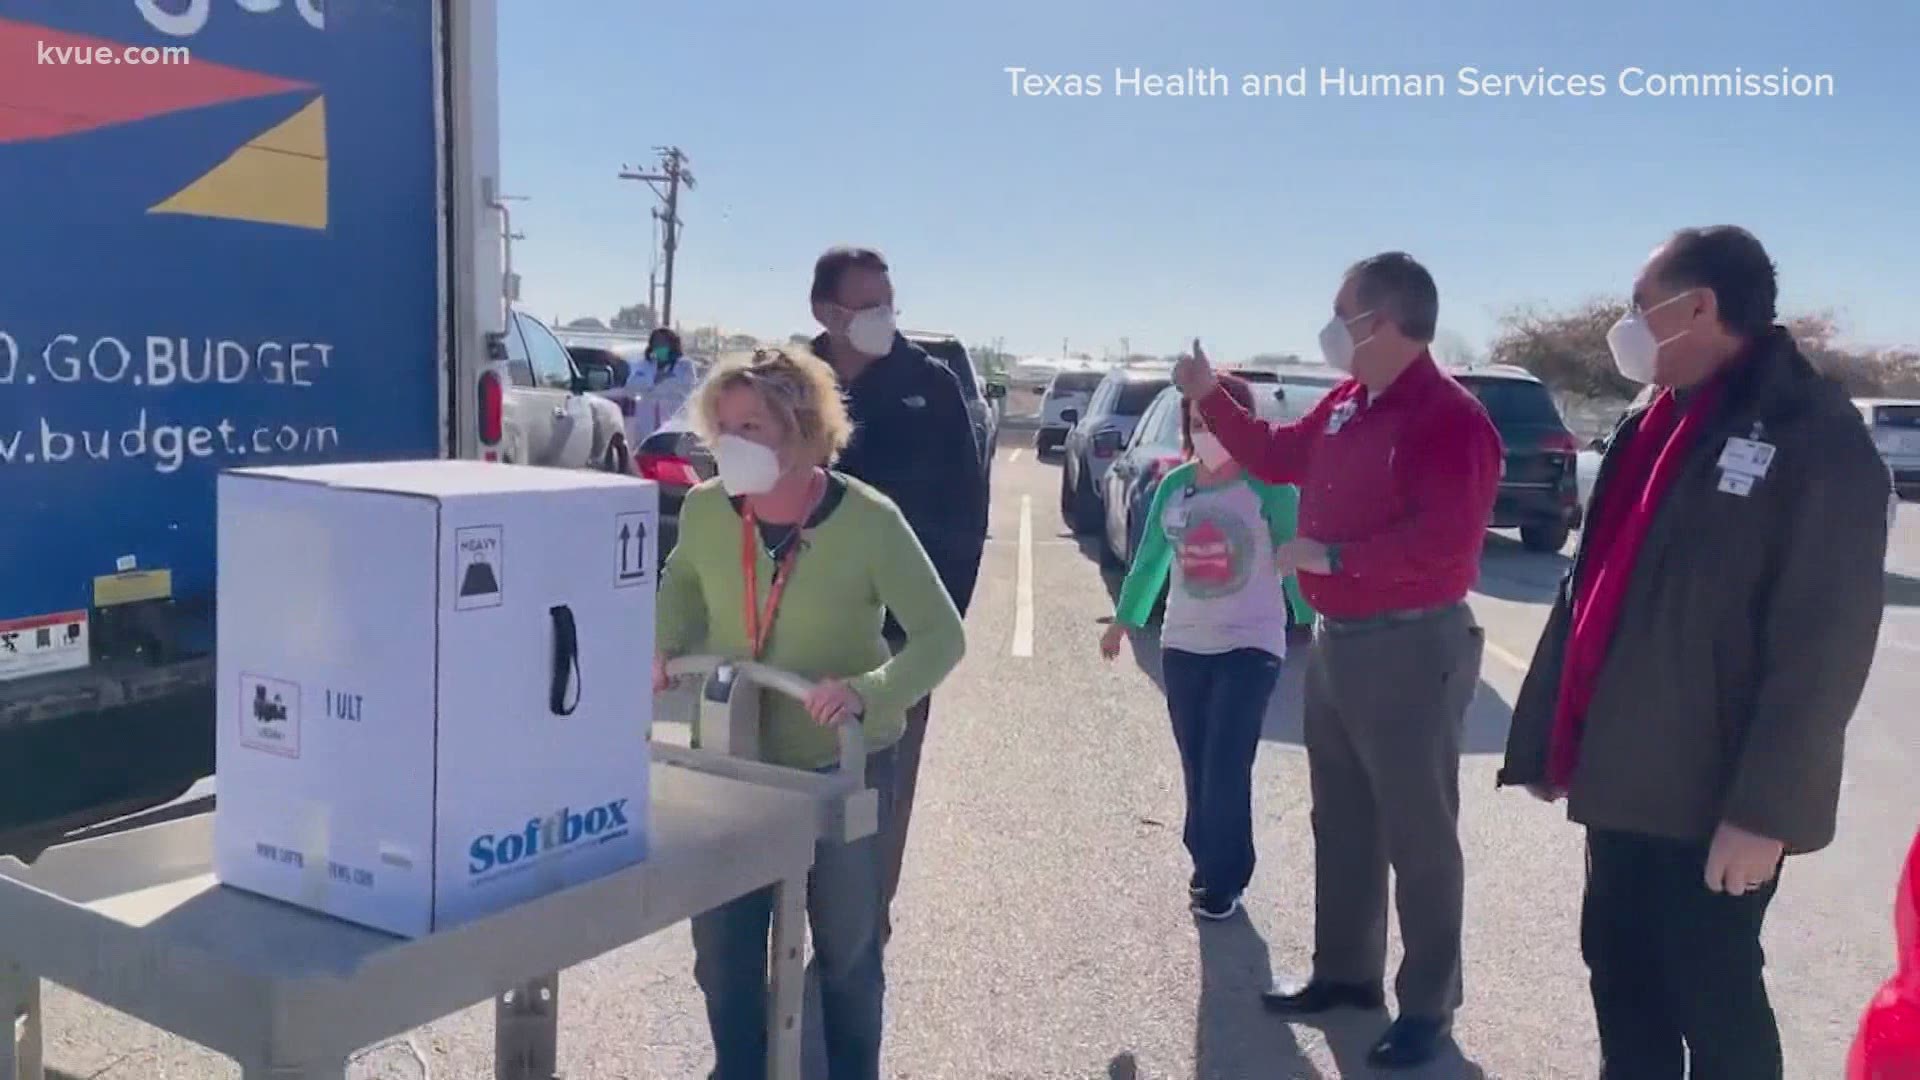 Nearly 250,00 COVID-19 vaccine doses have been distributed across Texas. Medical workers will be among the first to receive the vaccine.